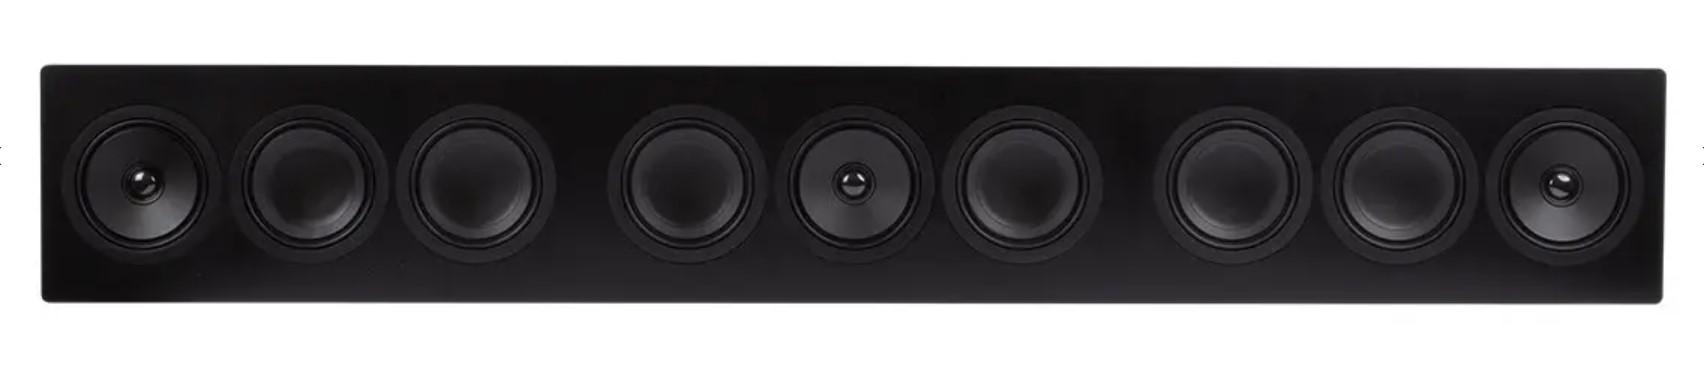 These THX-certified architectural speakers offer performance and value e3e39f8d monolith m ow3